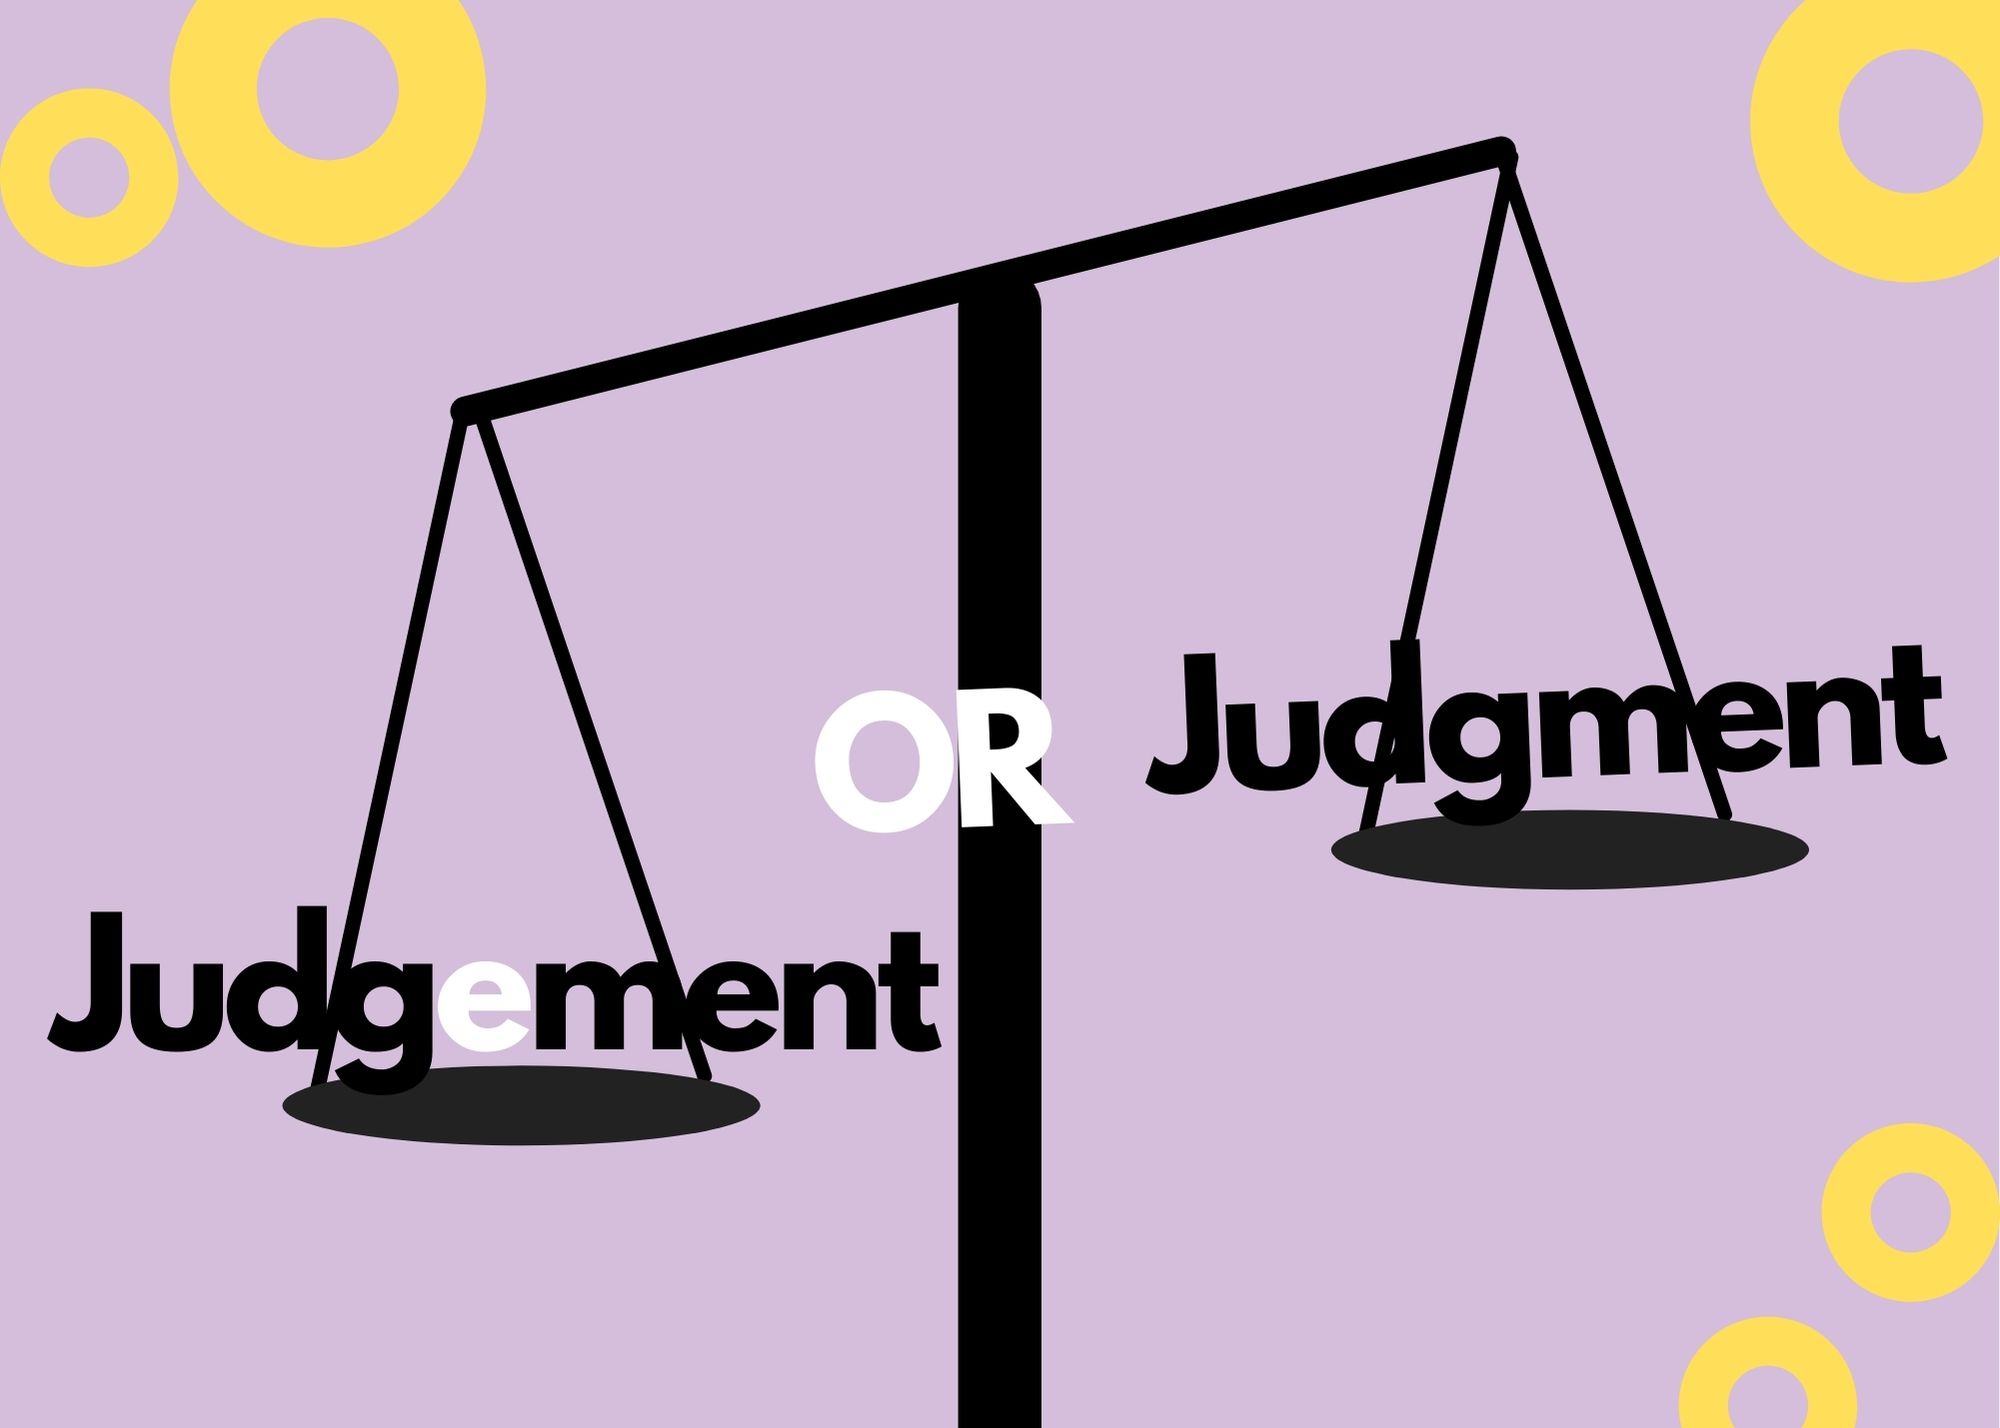 Words Judgement or Judgement on a scale